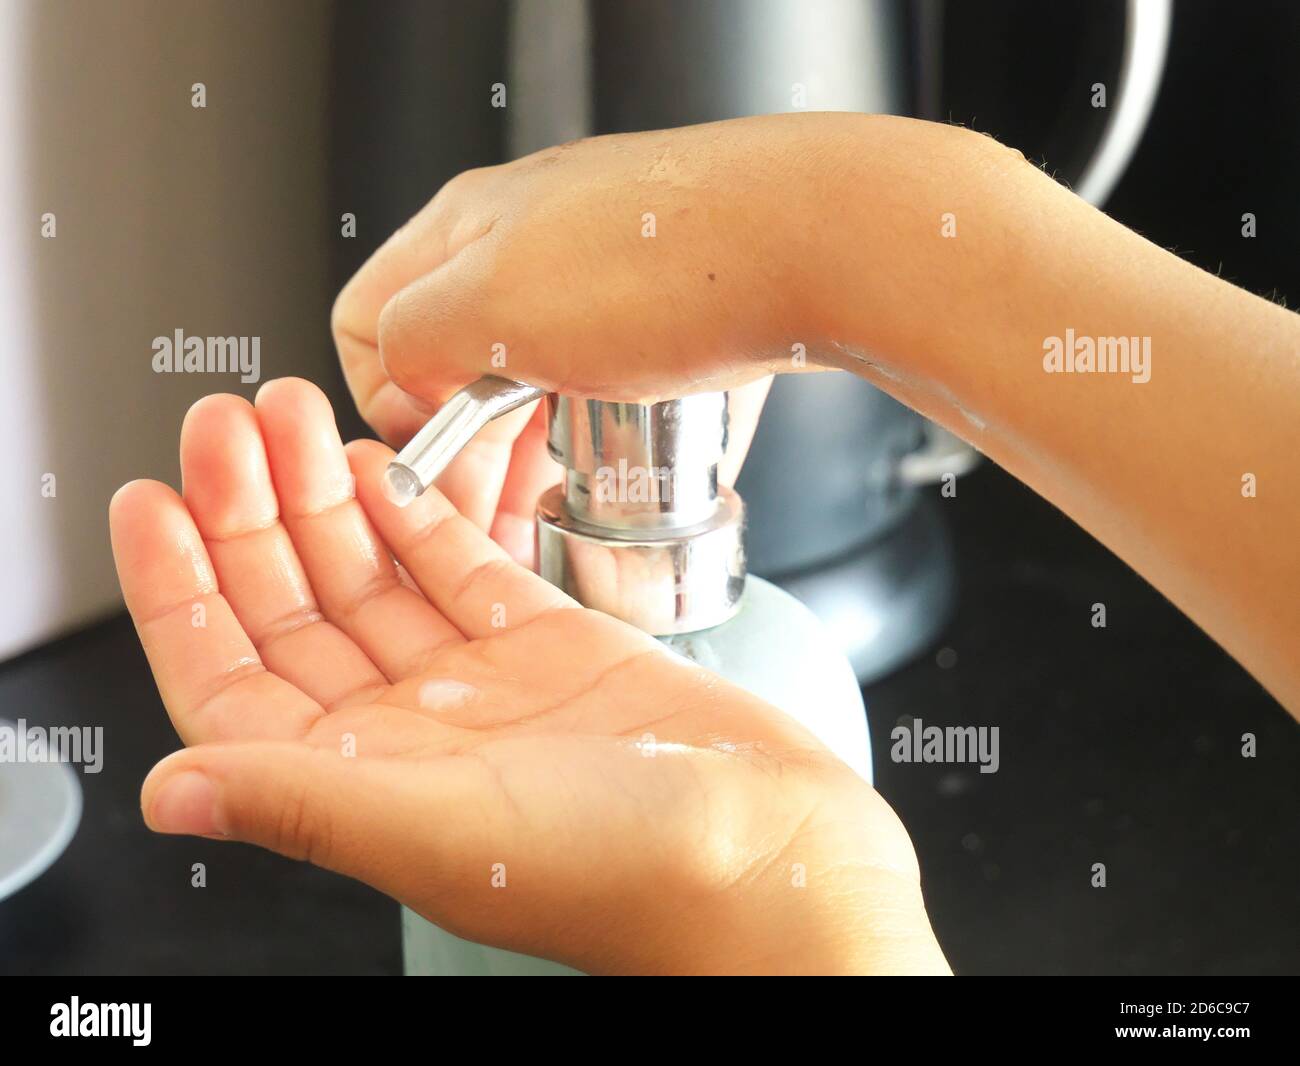 Close-up of a child's hands washing their hands. Stock Photo